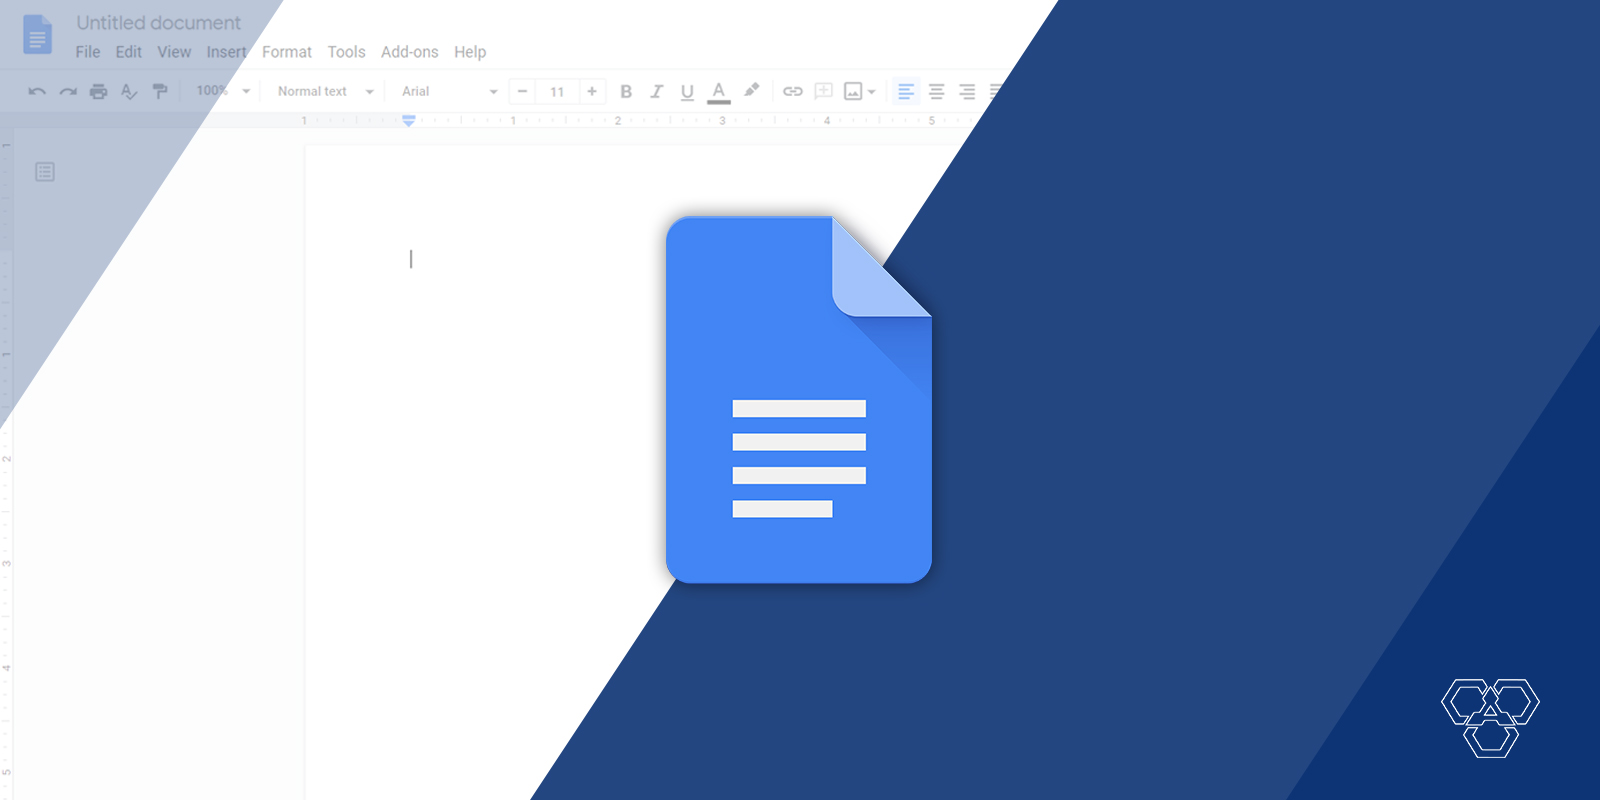 How To Change The Page Color In A Google Docs